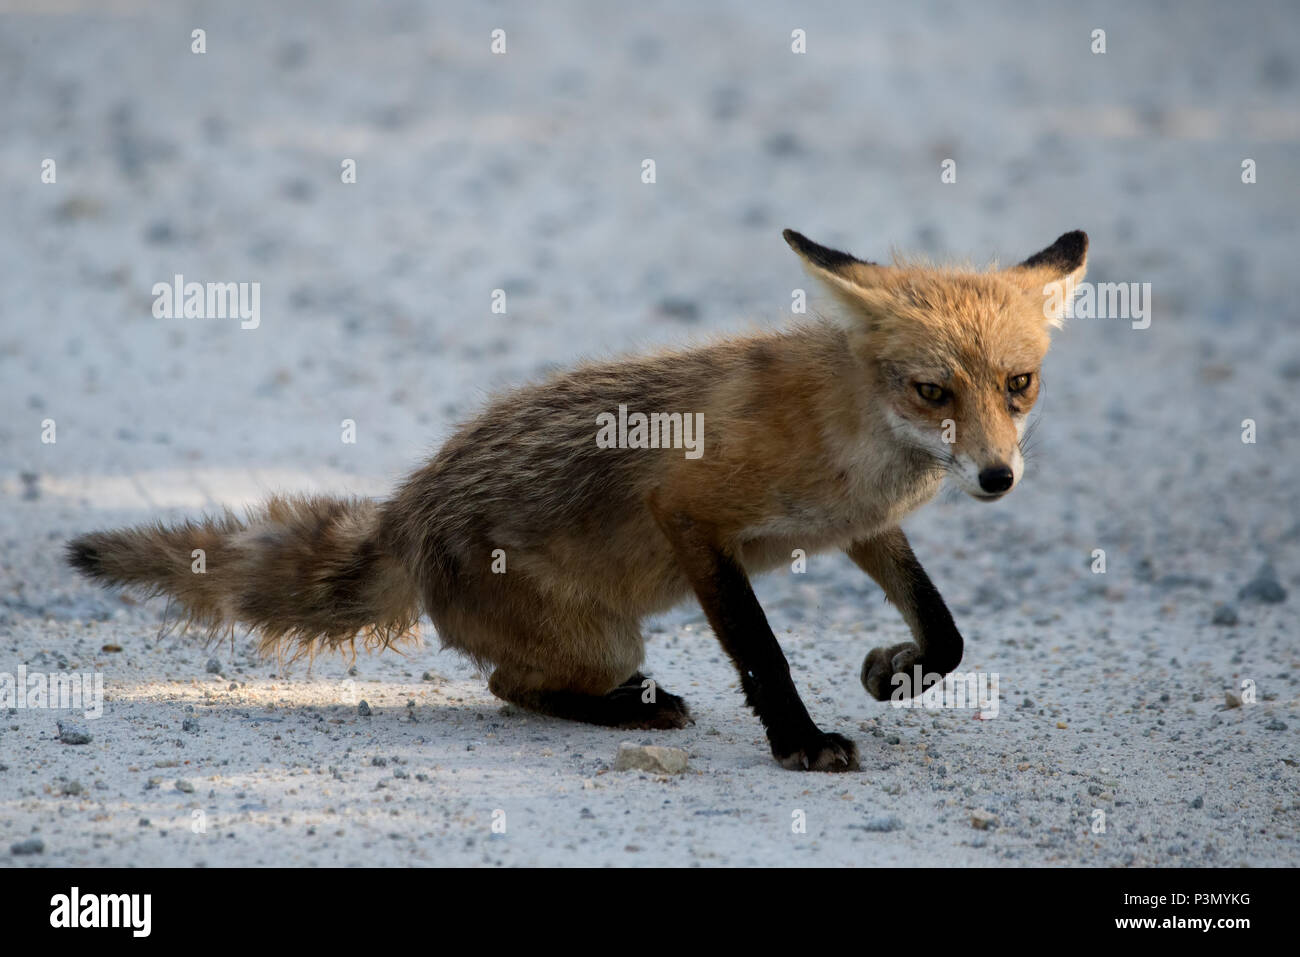 Red fox emerges from reeds at sunset at Bombay Hook National Wildlife Refuge, Delaware, USA Stock Photo